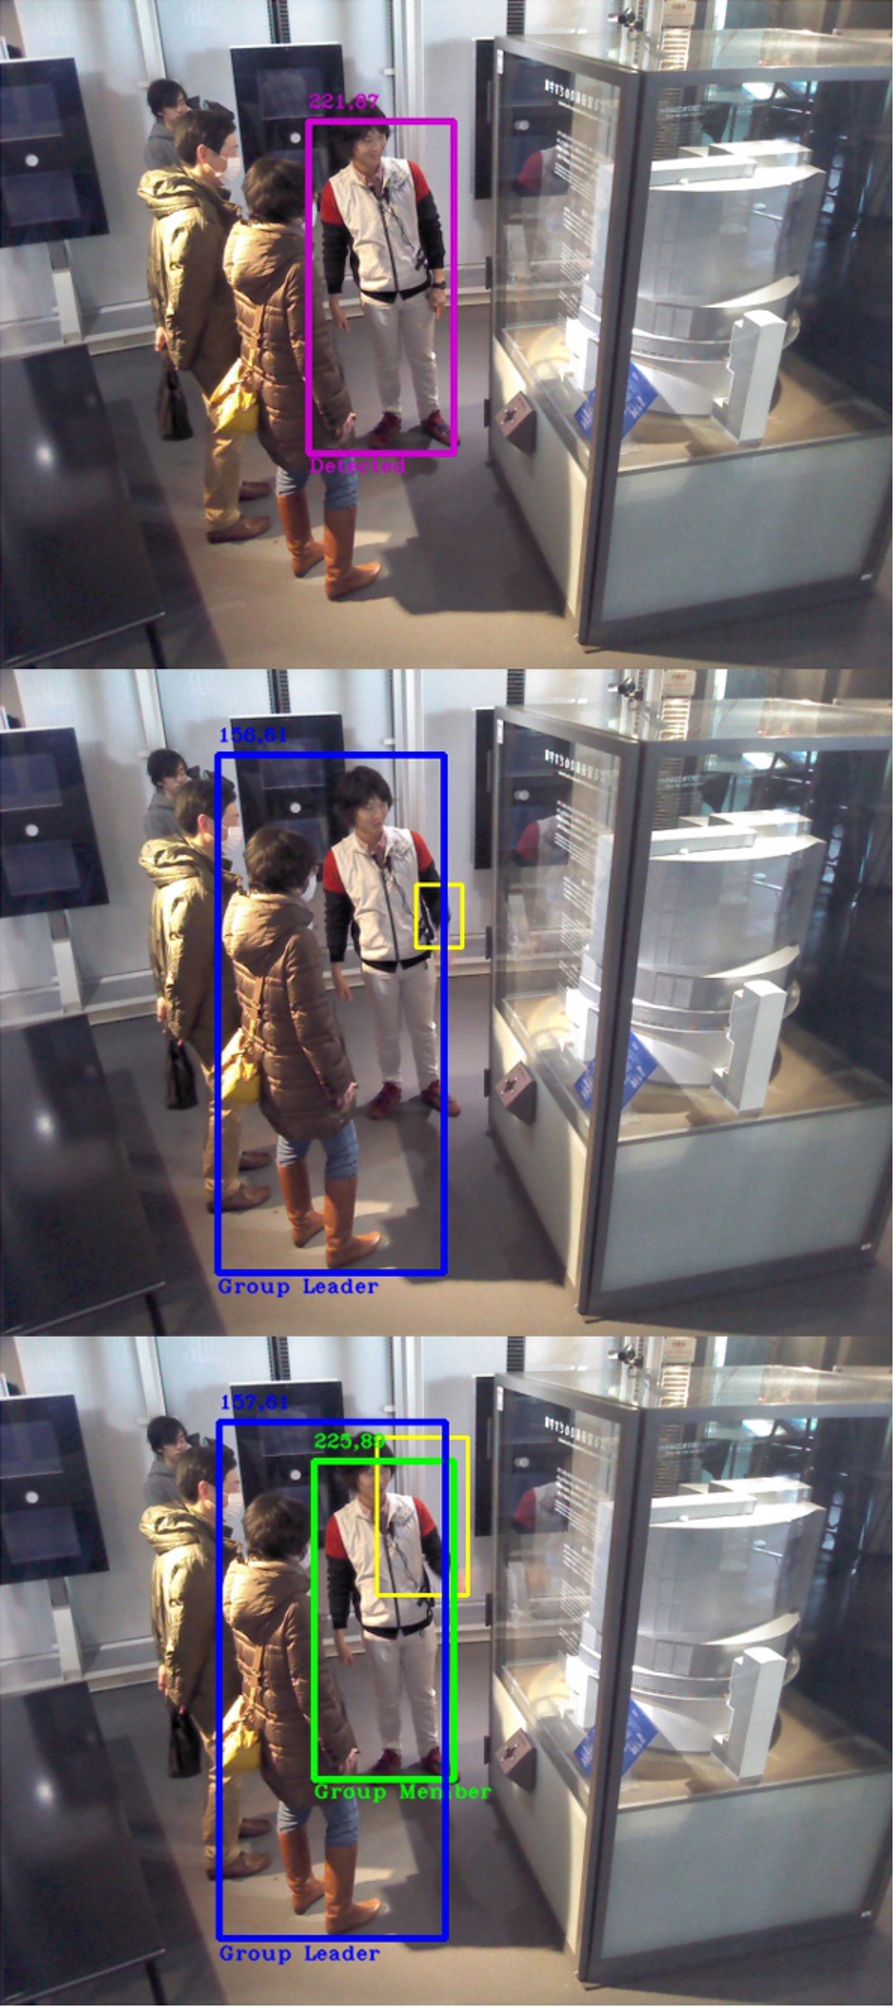 Video 1 with 36% of accuracy. Top: Frame 1, science communicator has been detected, no role assigned yet. Middle: Frame 4, science communicator gestures and motion box overlaps with the only detection obtained, selecting a museum visitor as the group leader. Bottom: Frame 6, science communicator is detected after the leader role has been given, appointing him as a group member.